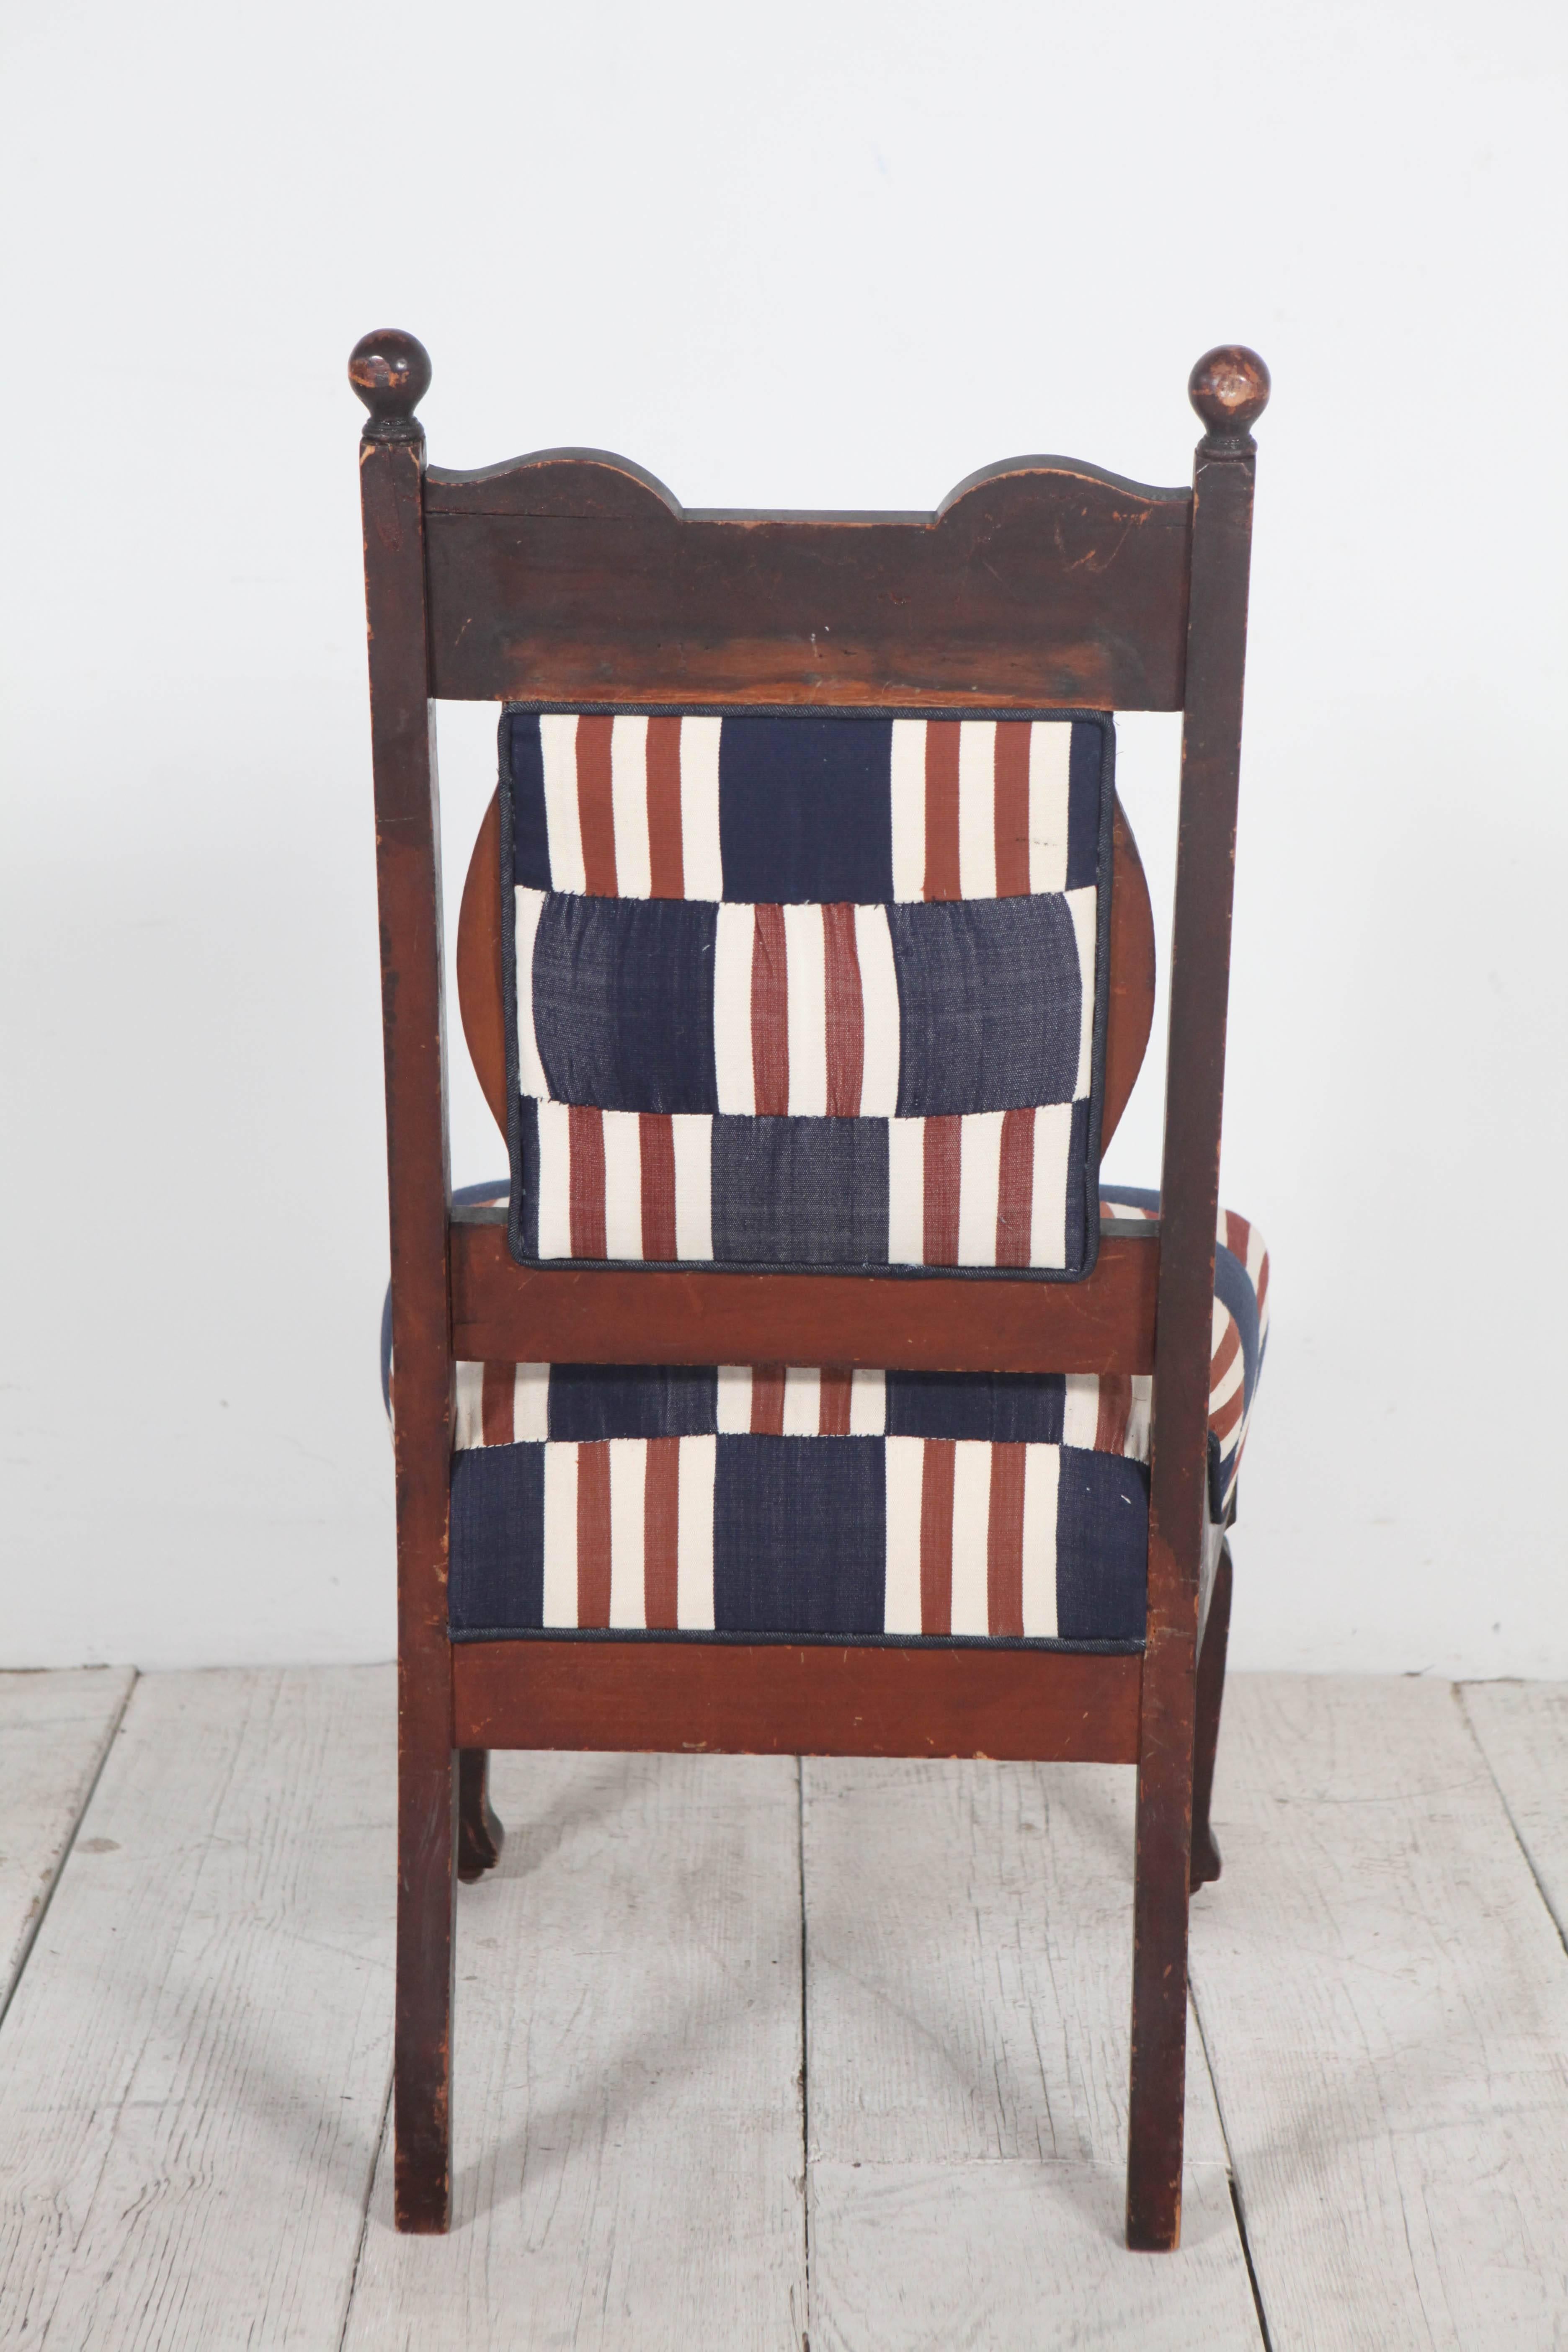 Edwardian Salon Chairs Upholstered in Vintage African Fabric 4